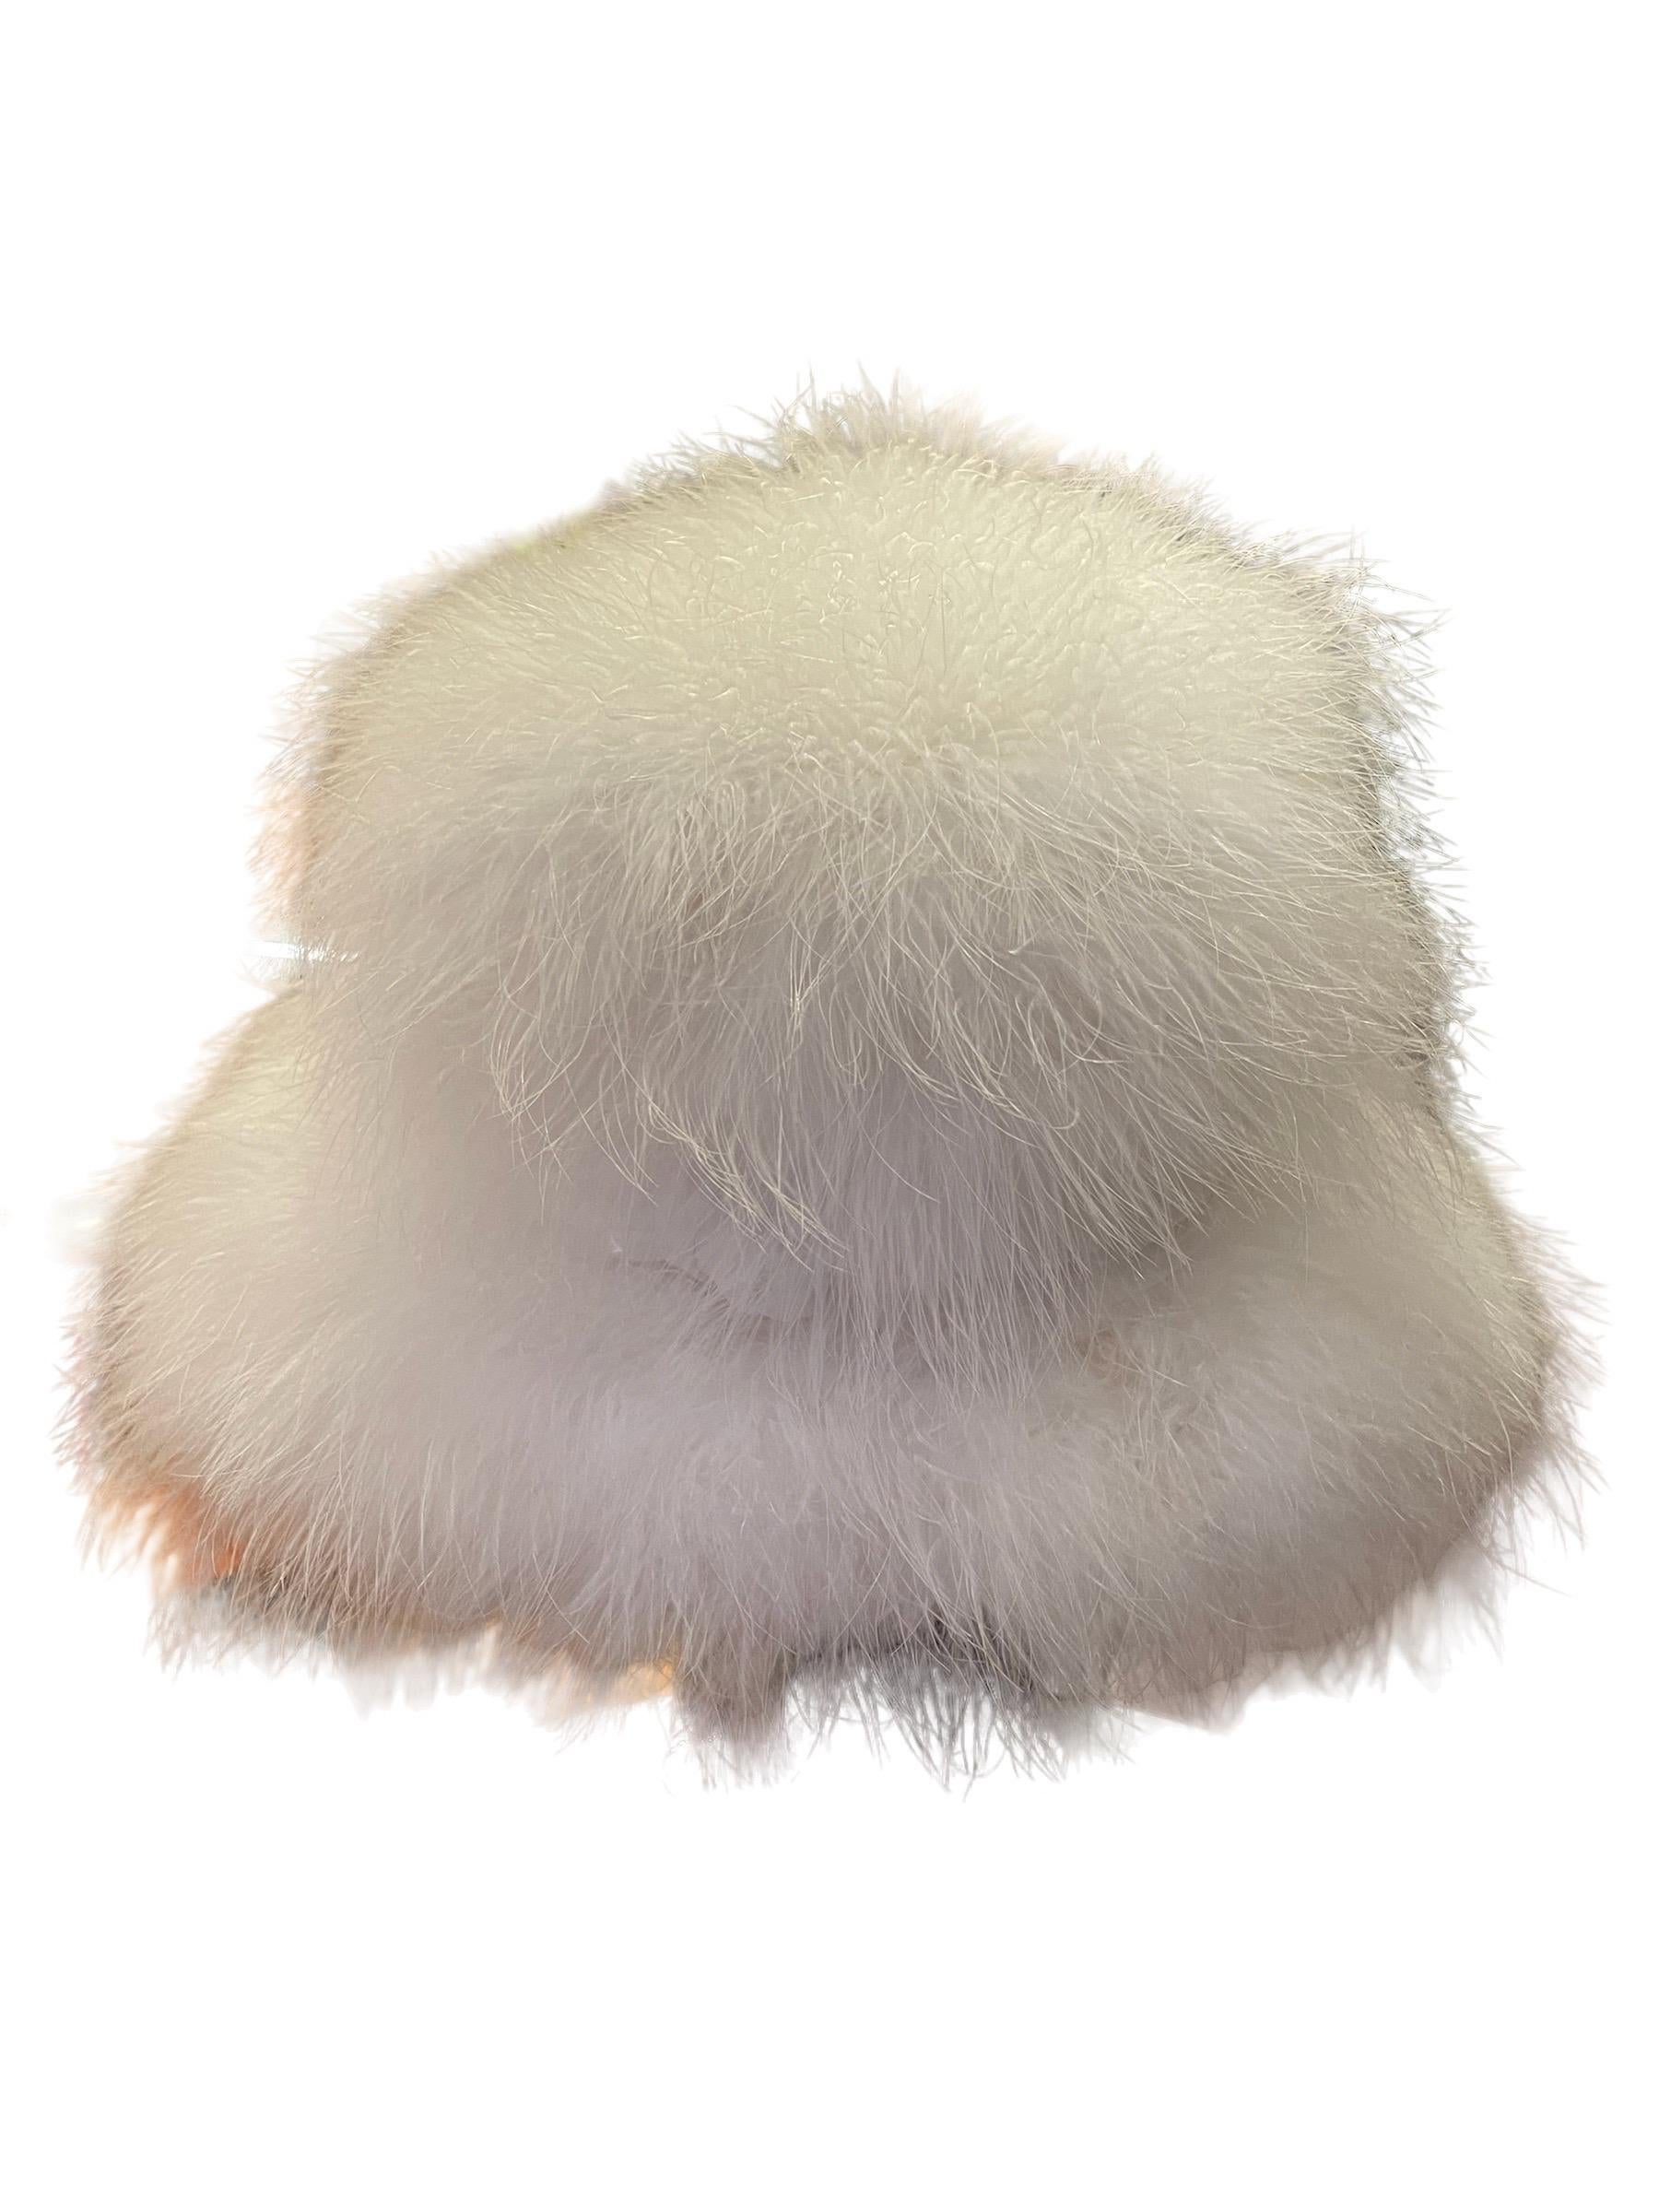 Women's or Men's 1960s White Ostrich Feather Fabulous Hat 